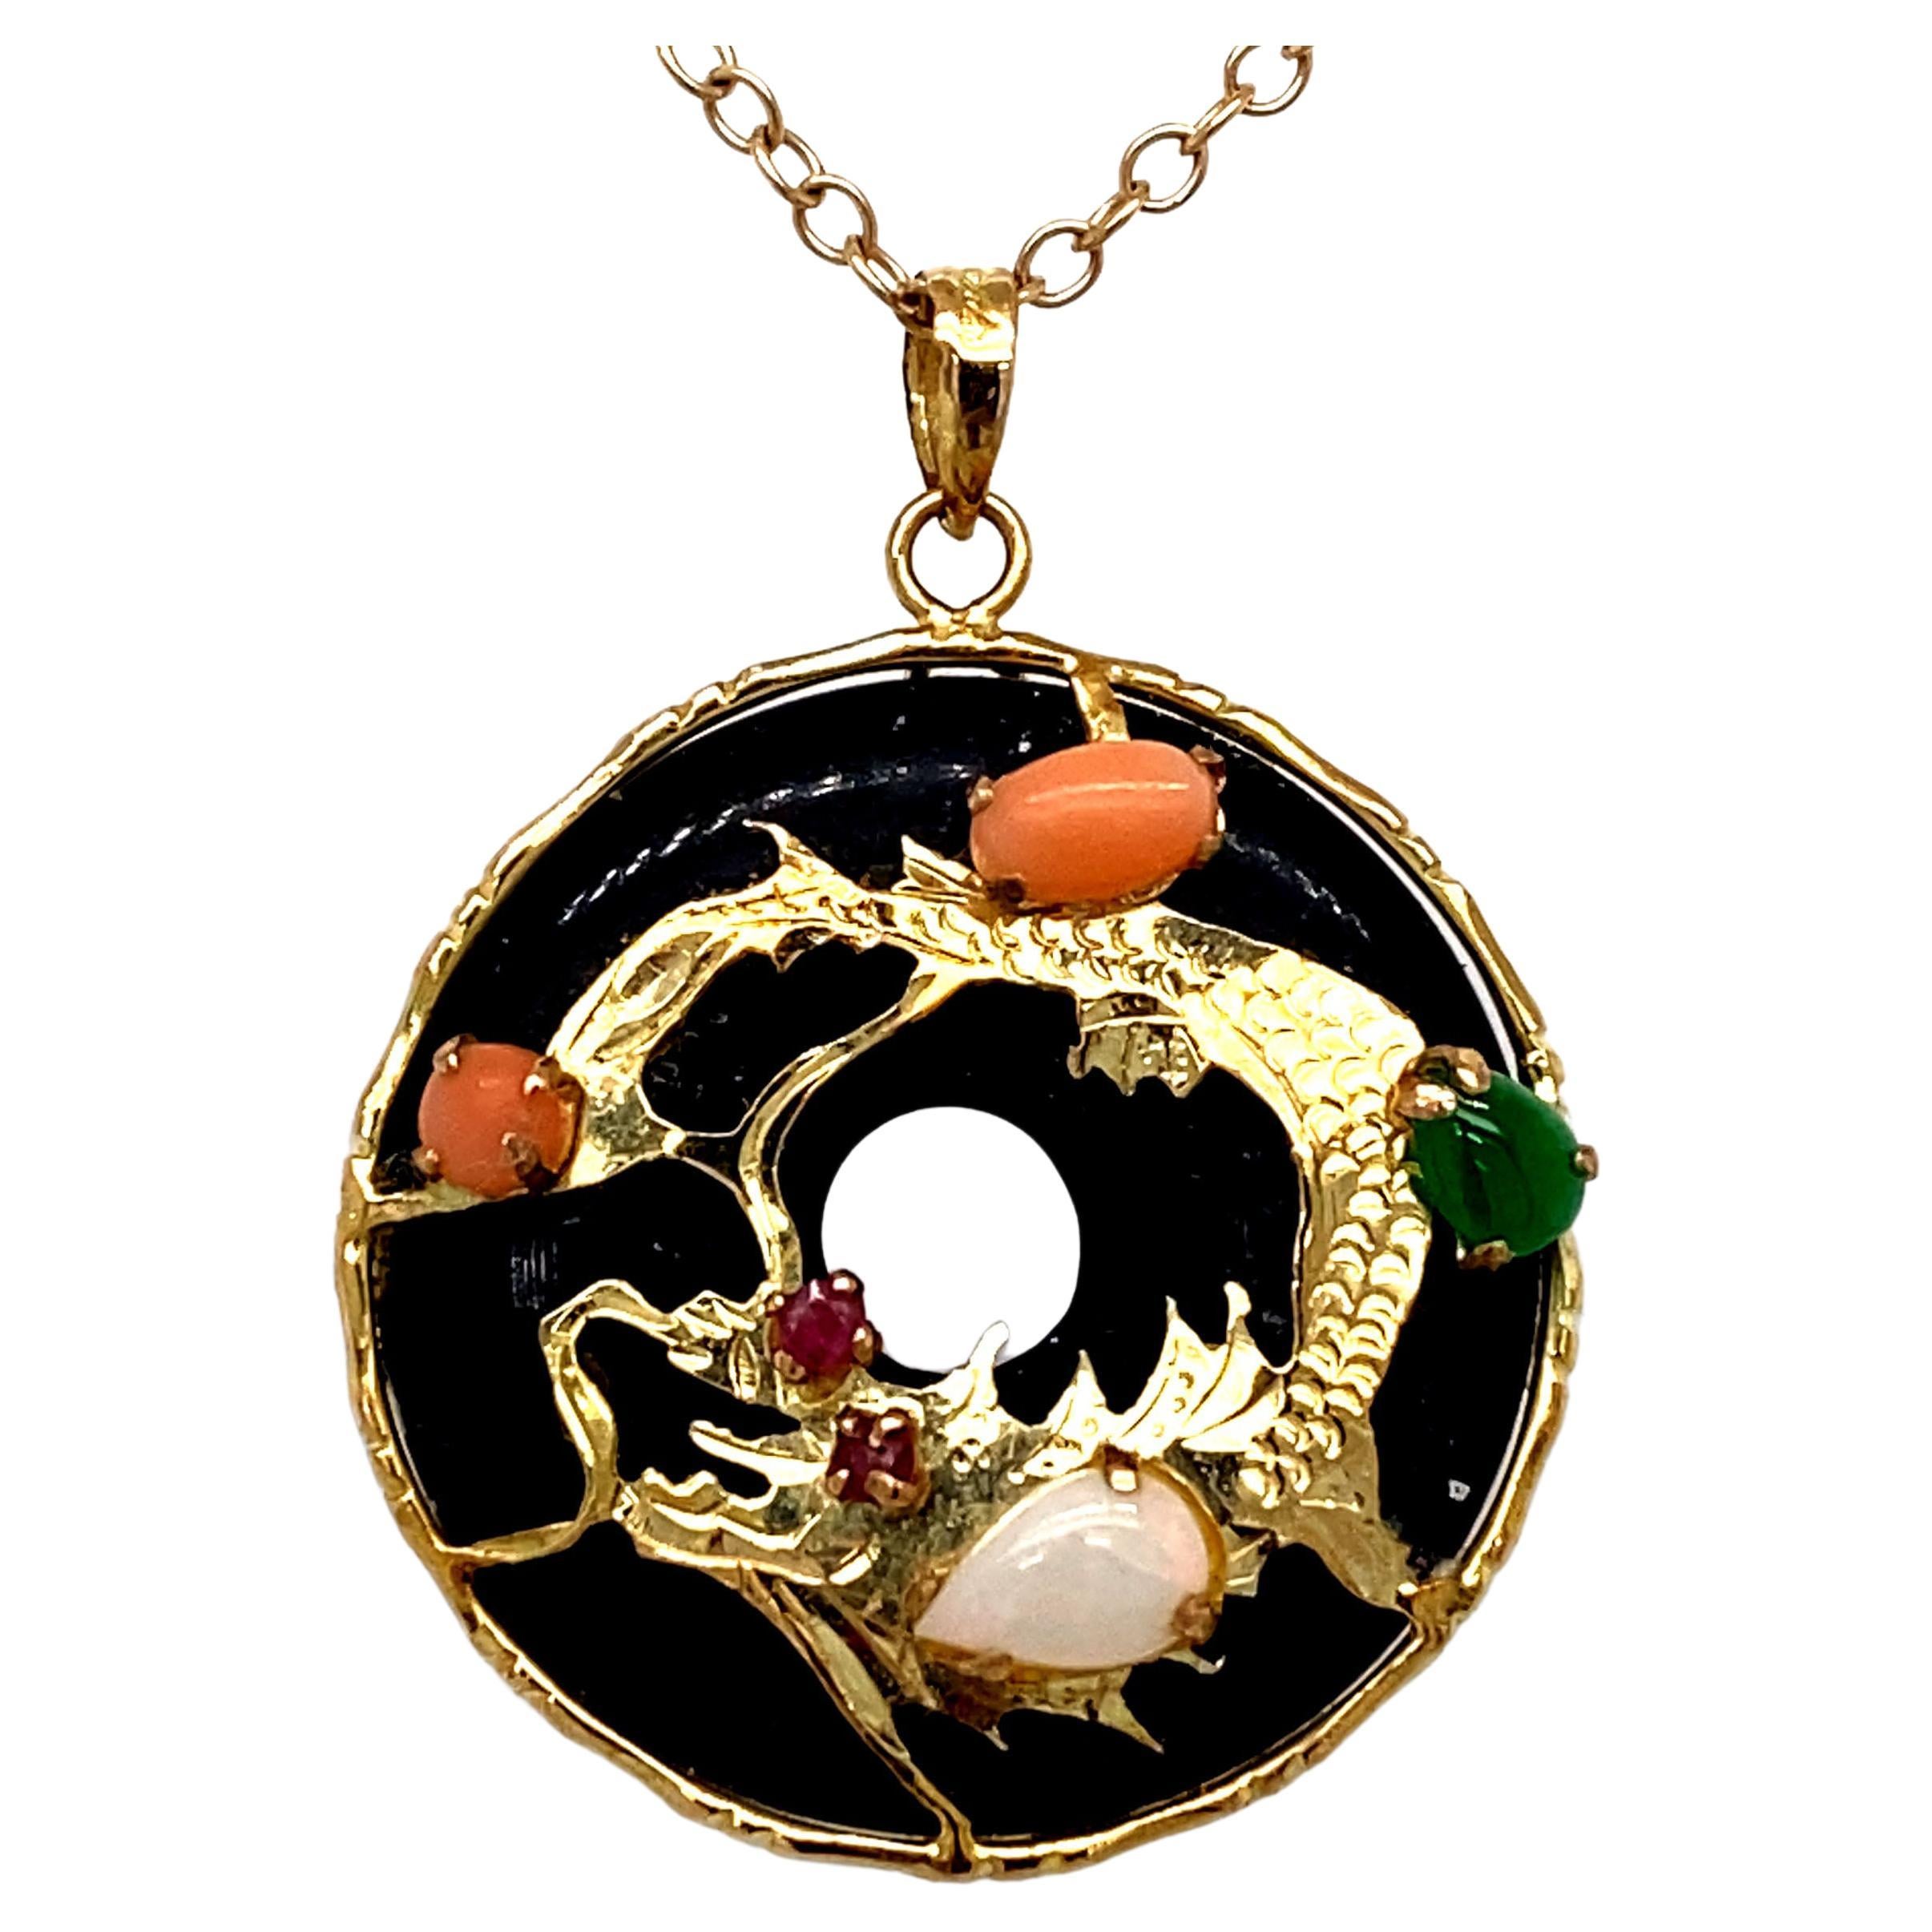 Dragon Pendant with Coral, Ruby, Opal and Jade in 14 Karat Gold